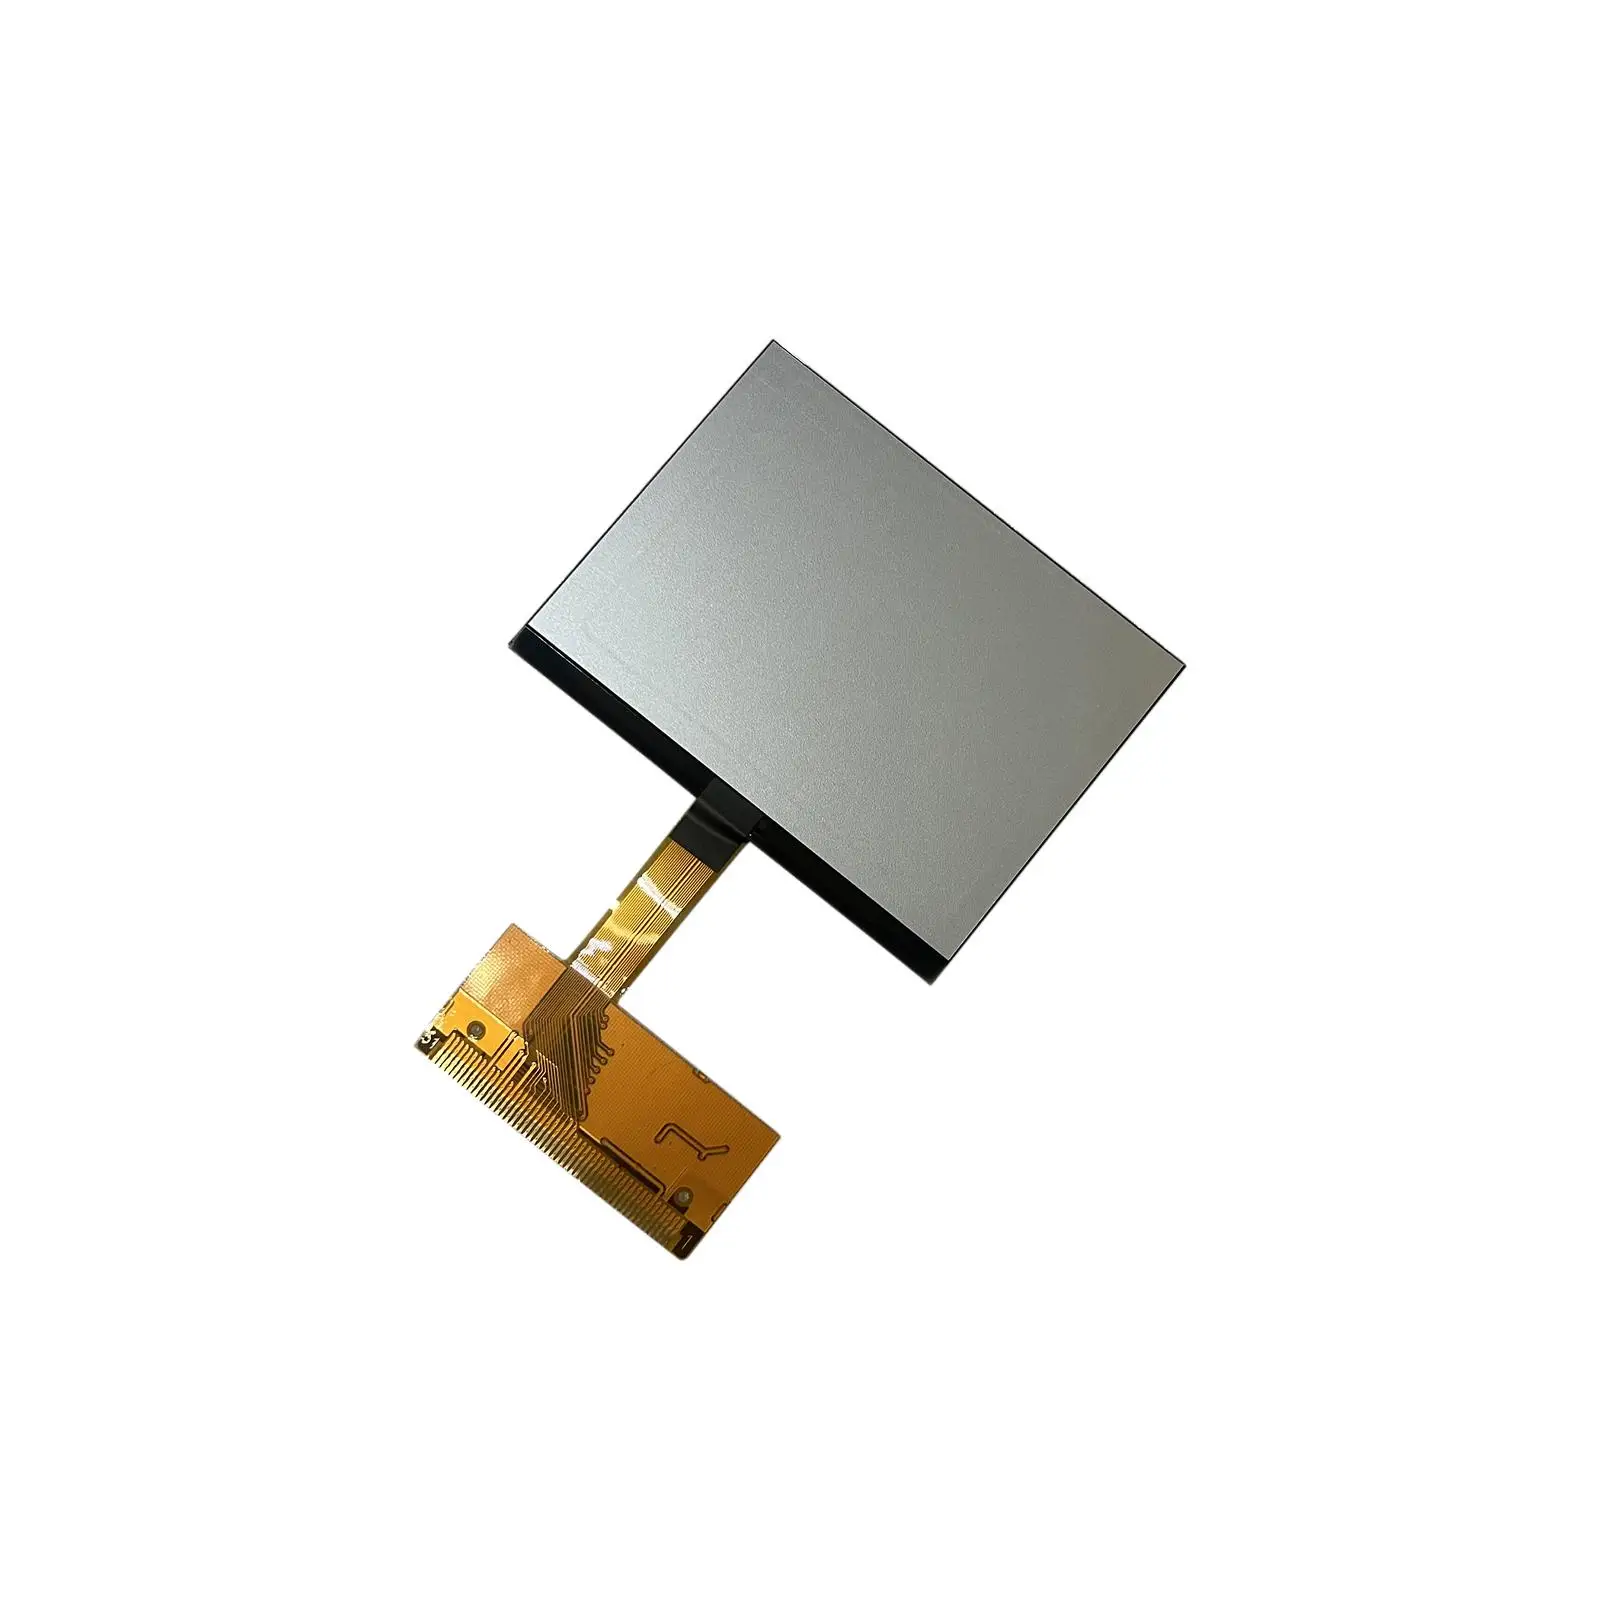 LCD Display Screen Replacements Spare Parts for Audi A3 A4 Pixel Repair